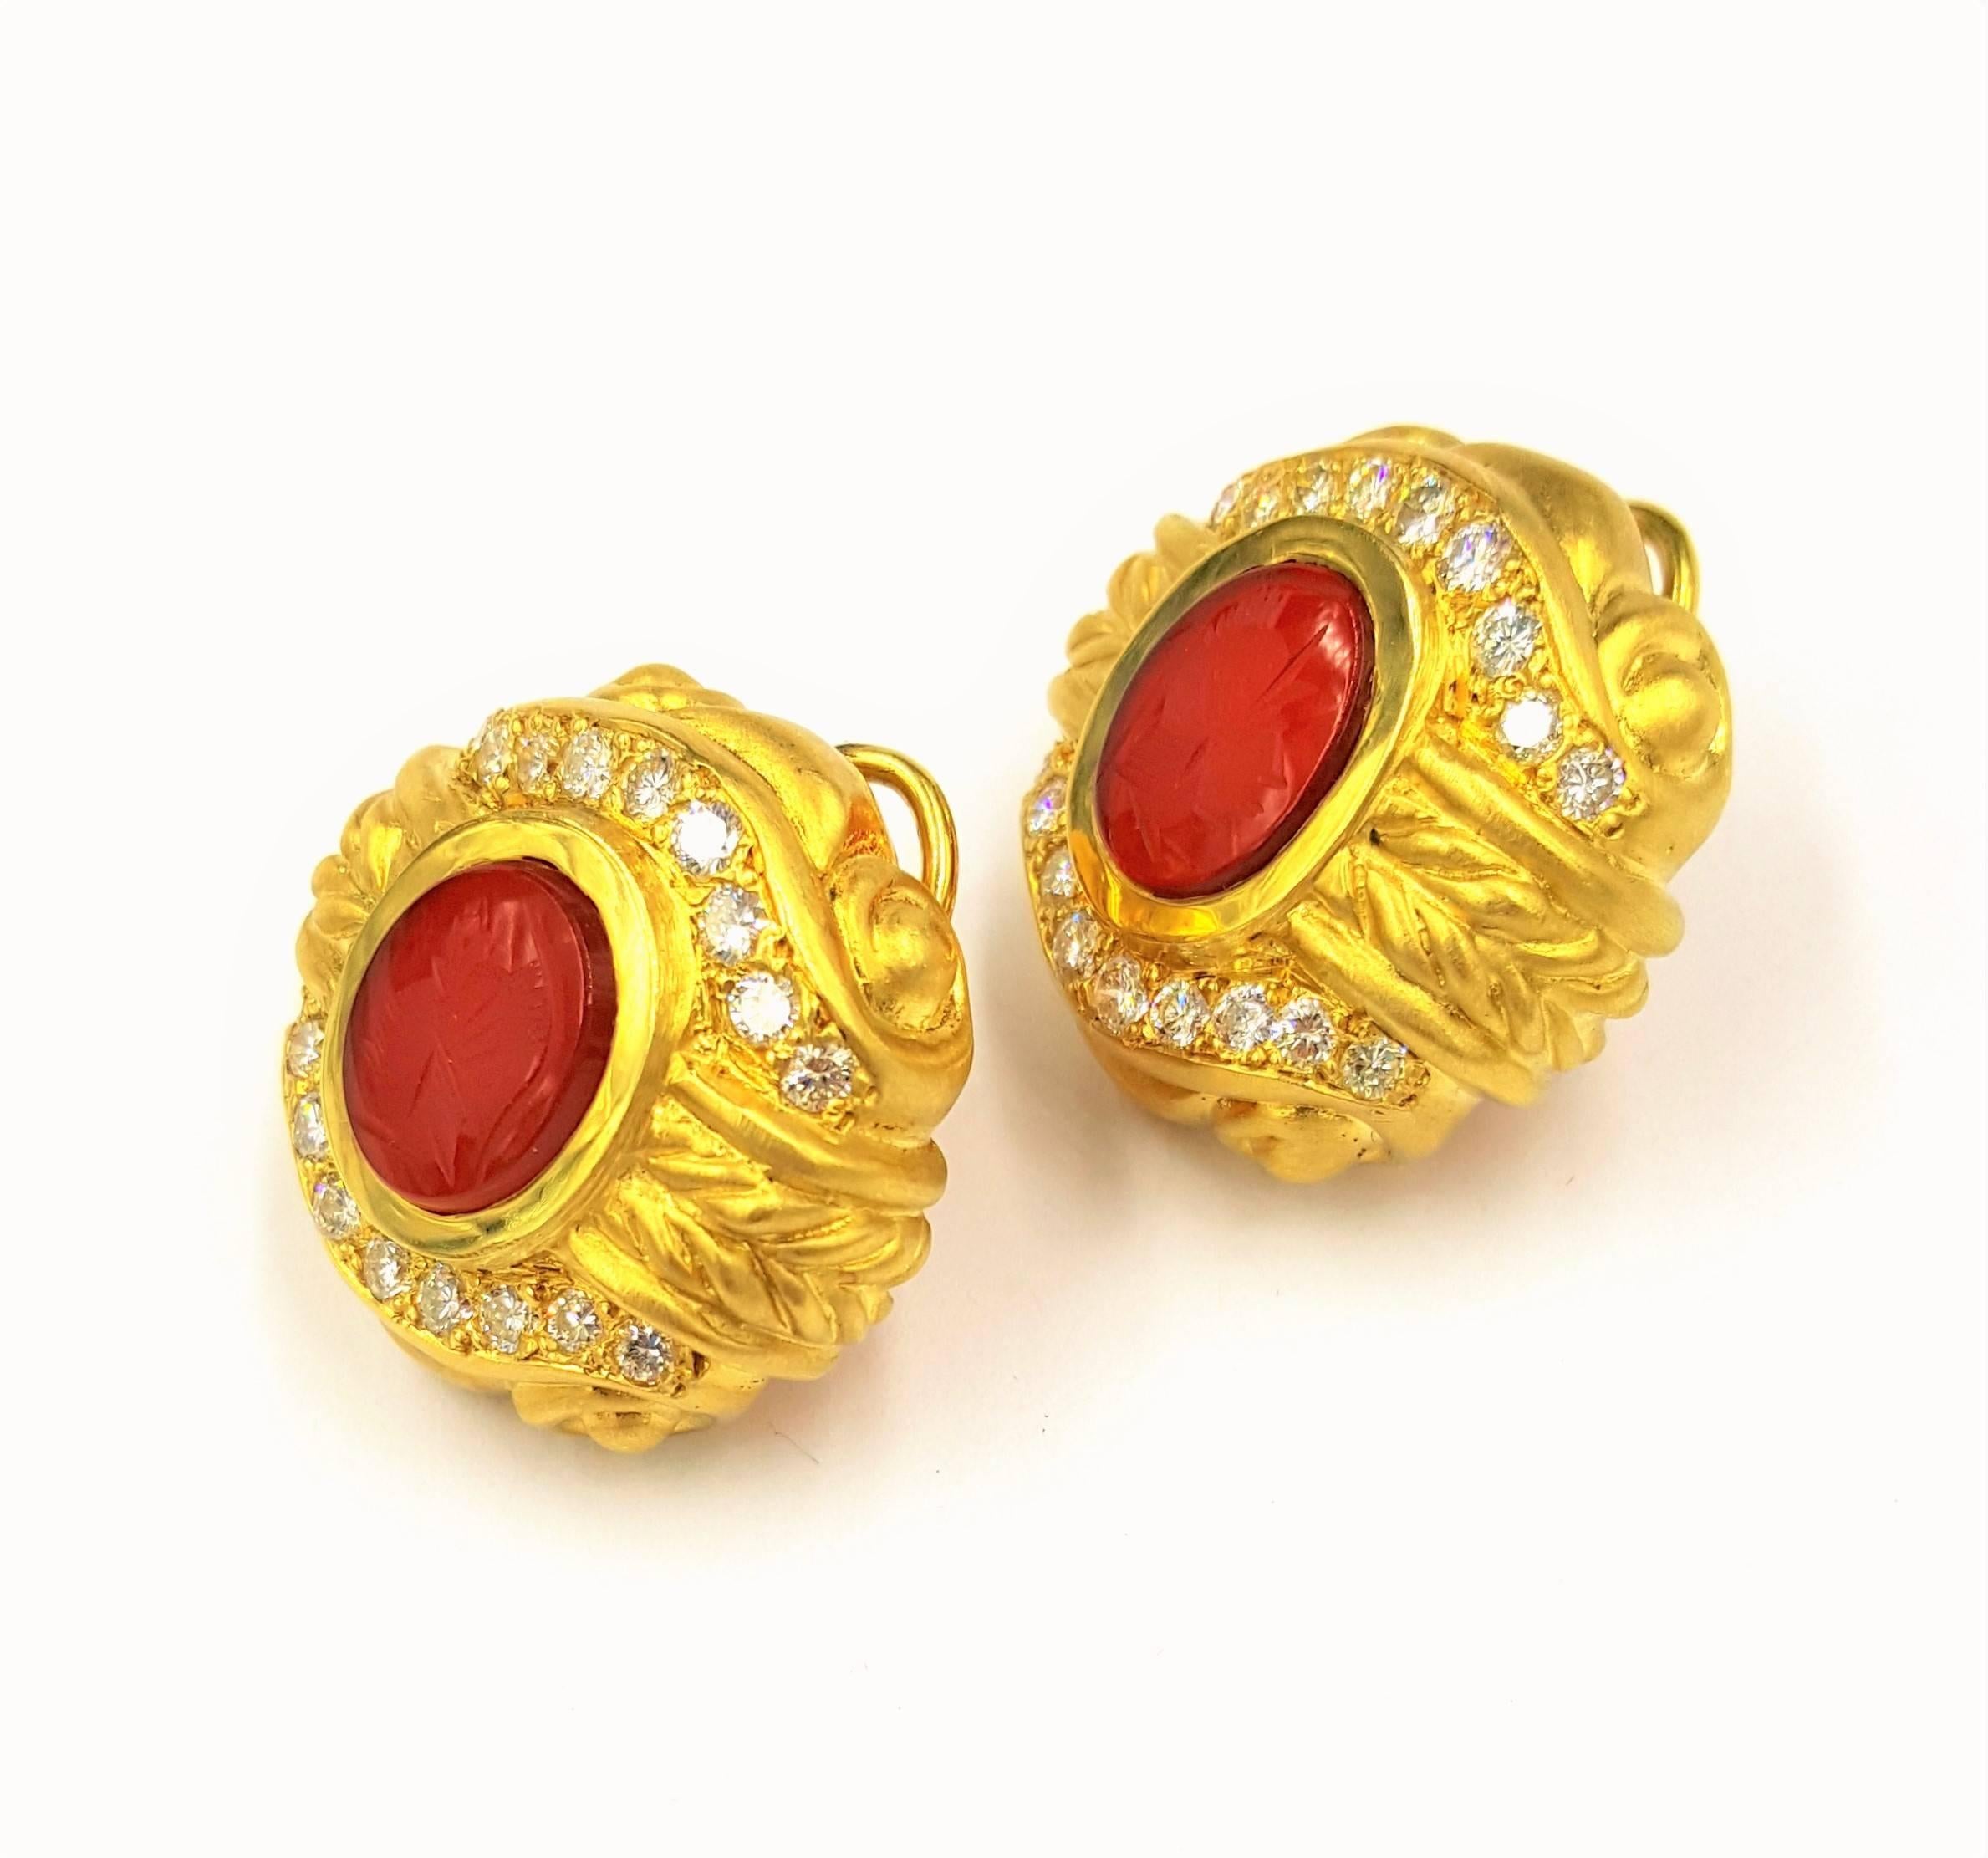 These stunning and magnificent Carnelian Intaglio Roman Cameo Clip On Earrings have posts for secured and comfortable wearing. These earrings feature 2.00 carats of VS clarity G color diamonds set in 18kt Yellow Gold and are in perfect condition